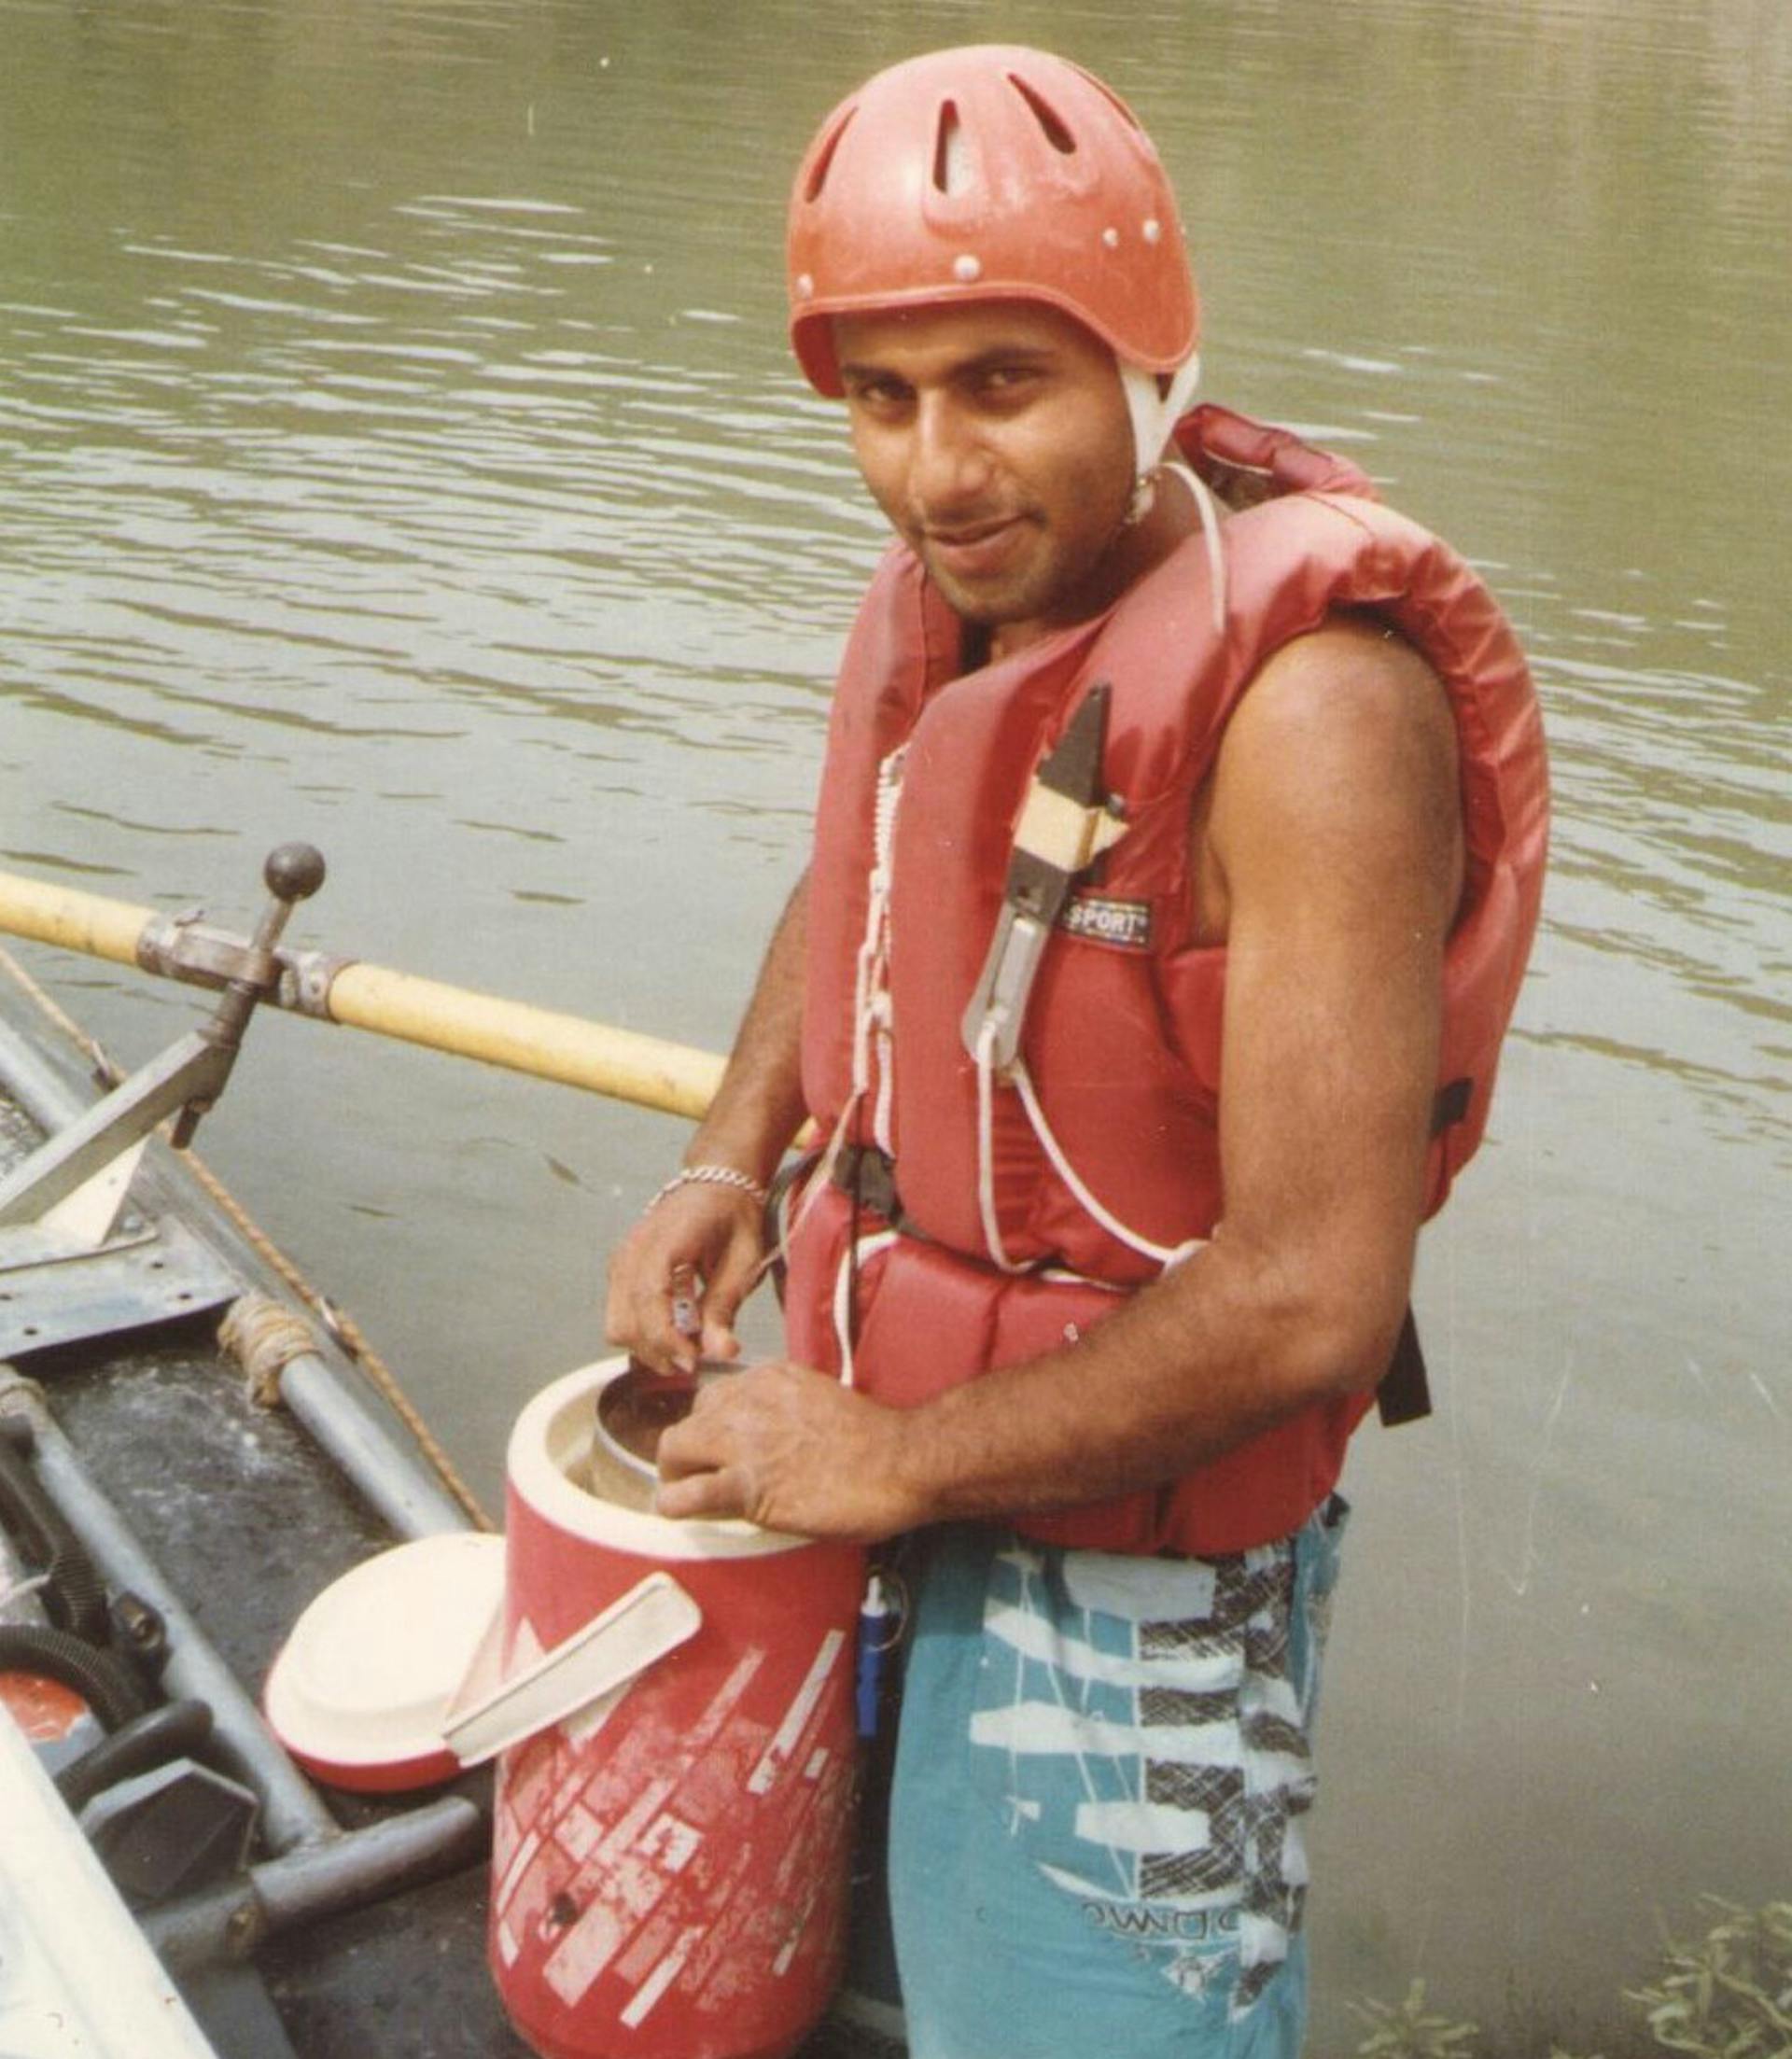 Akshay Kumar in 1990, a few months before the expedition. Courtesy: Salil Kumar